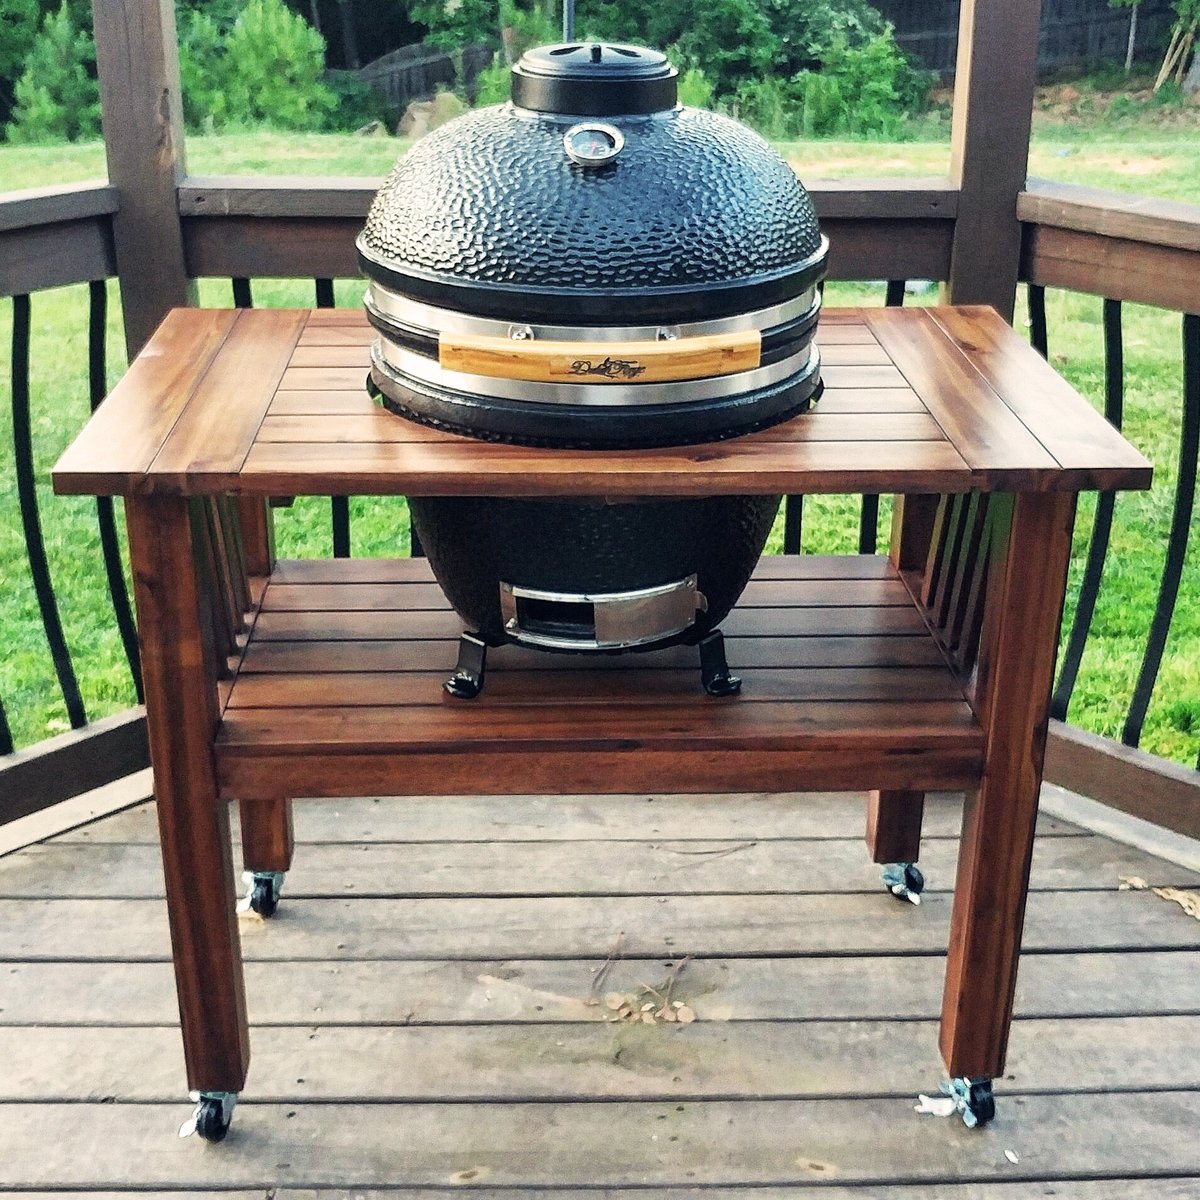 Grilling Season isn't quite over yet and our Duluth Forge Kamado Grills can cook up some delicious smoked BBQ. Click the link below to shop now.👇 🥩:bit.ly/2GAmx1d